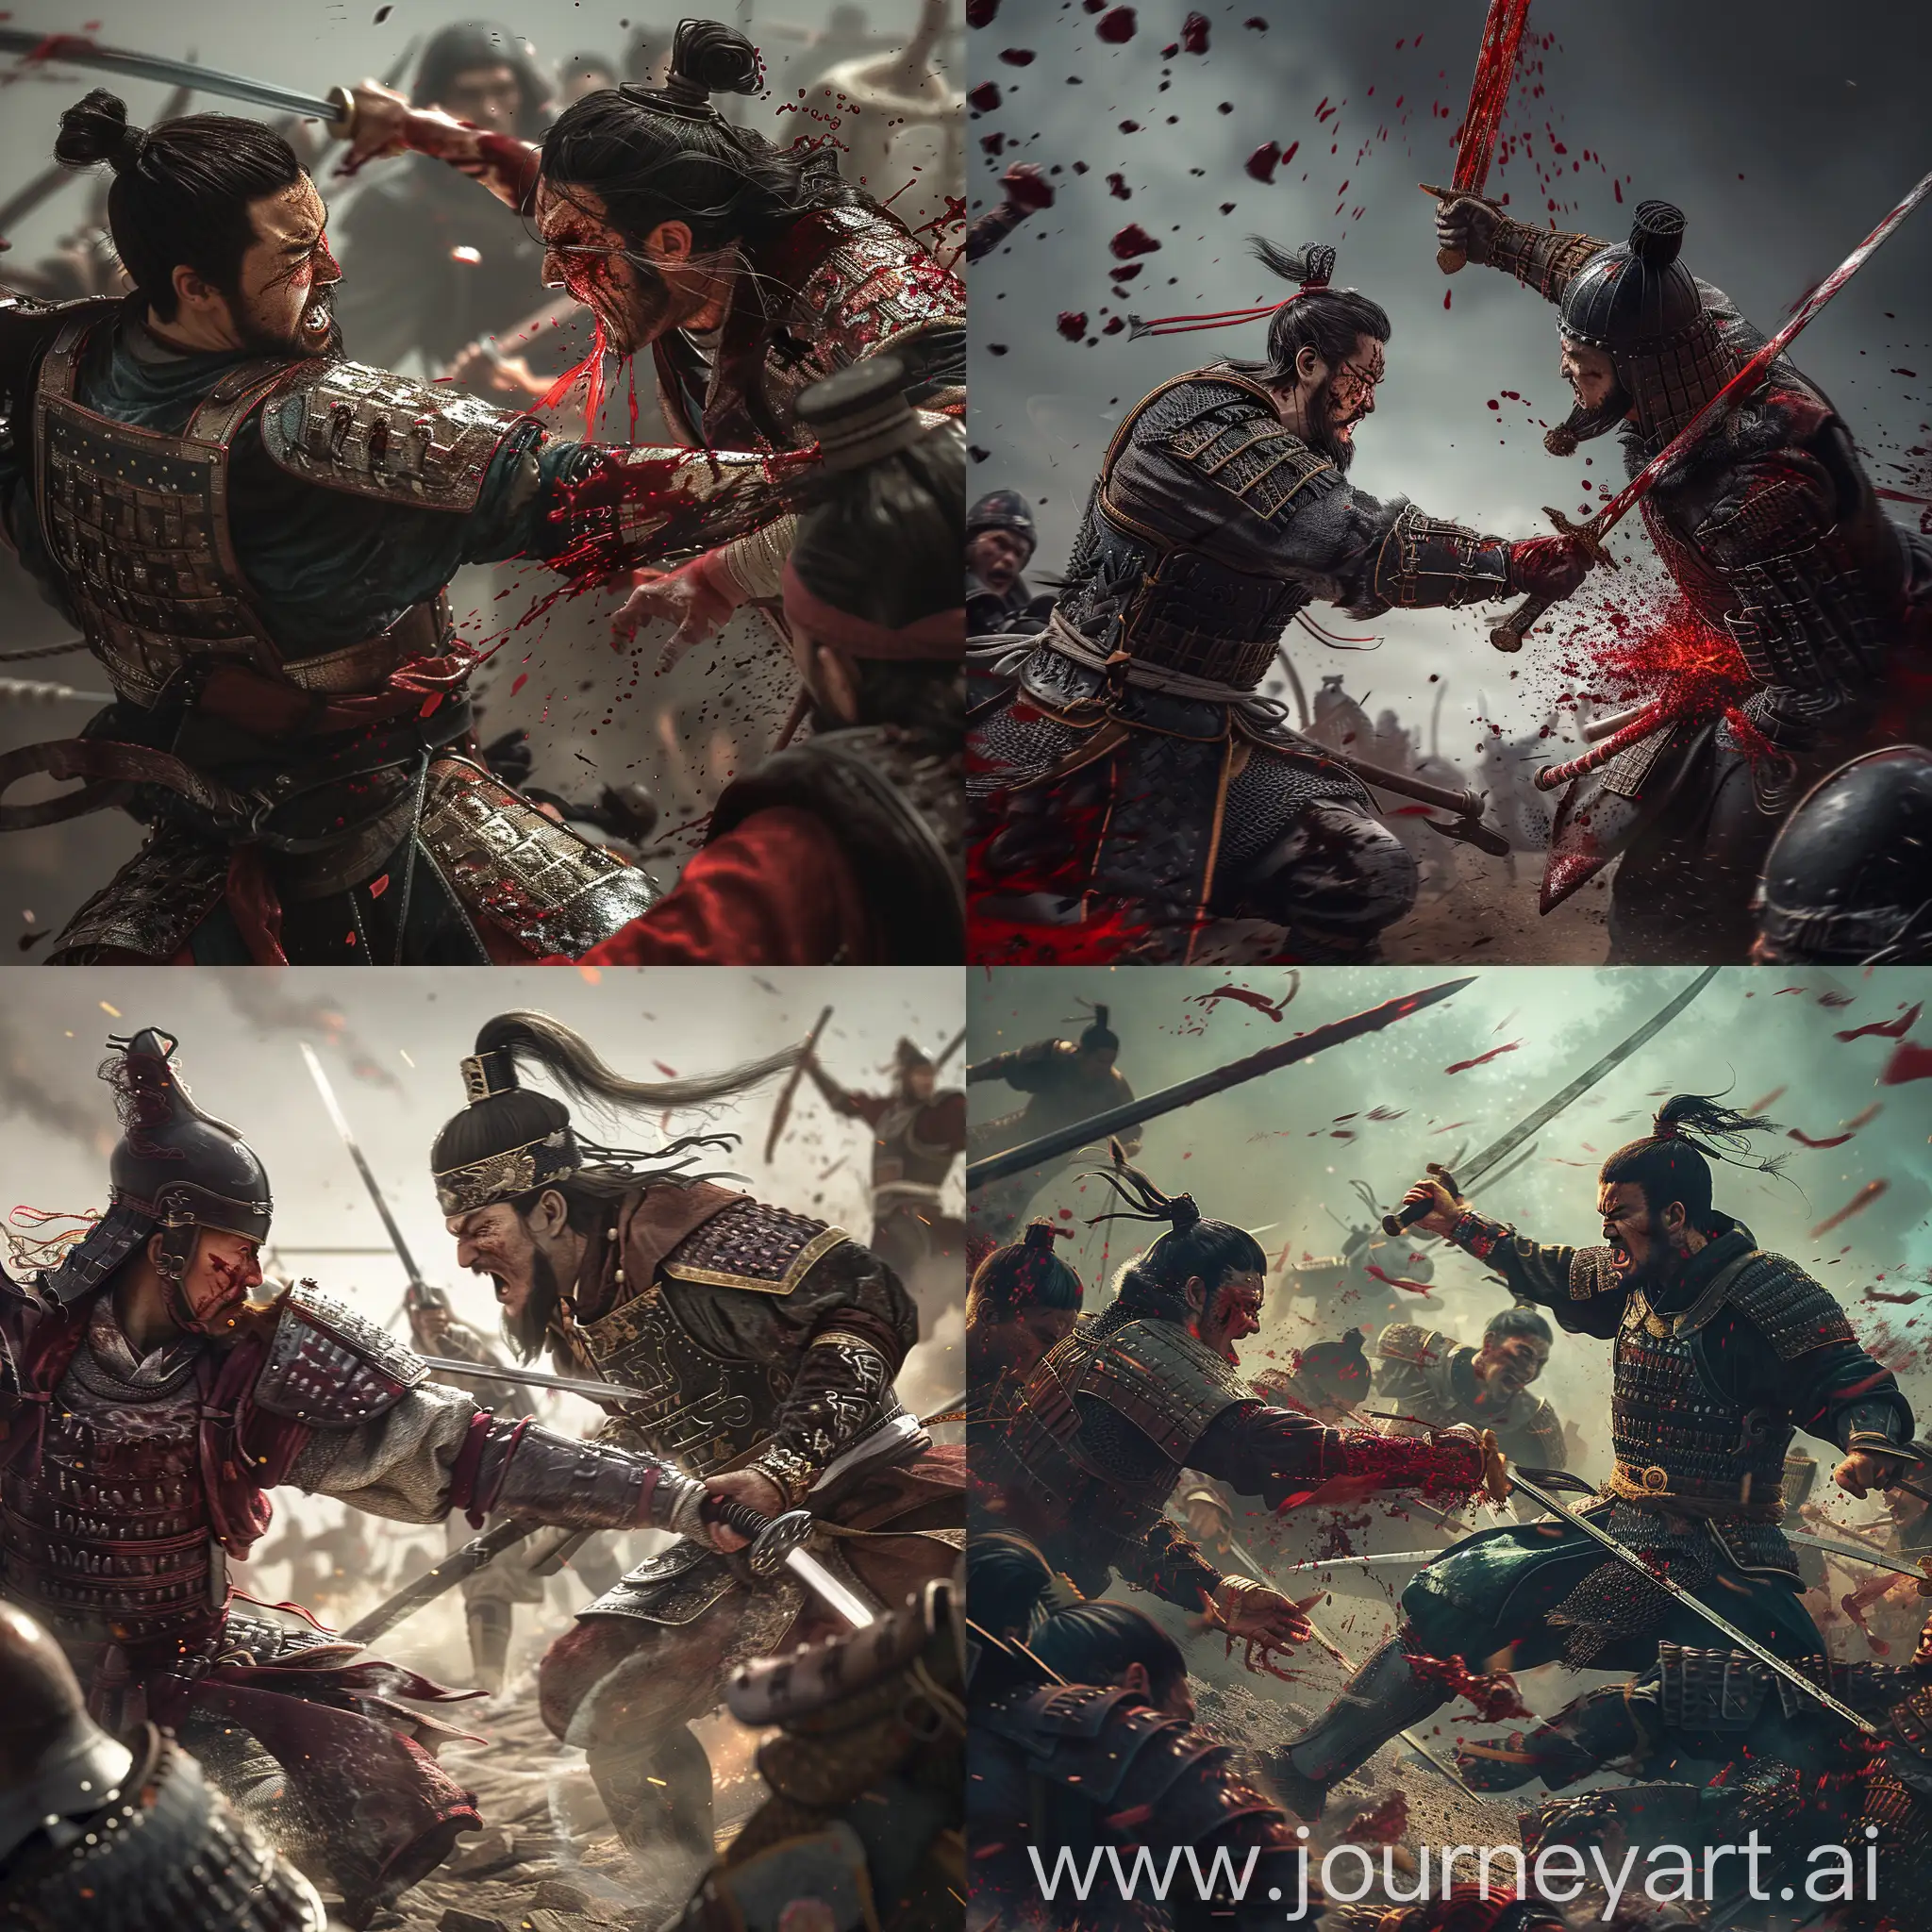 Epic-Battle-Scene-Hyper-Realistic-Generals-from-the-Three-Kingdoms-Engage-in-a-Bloody-Conflict